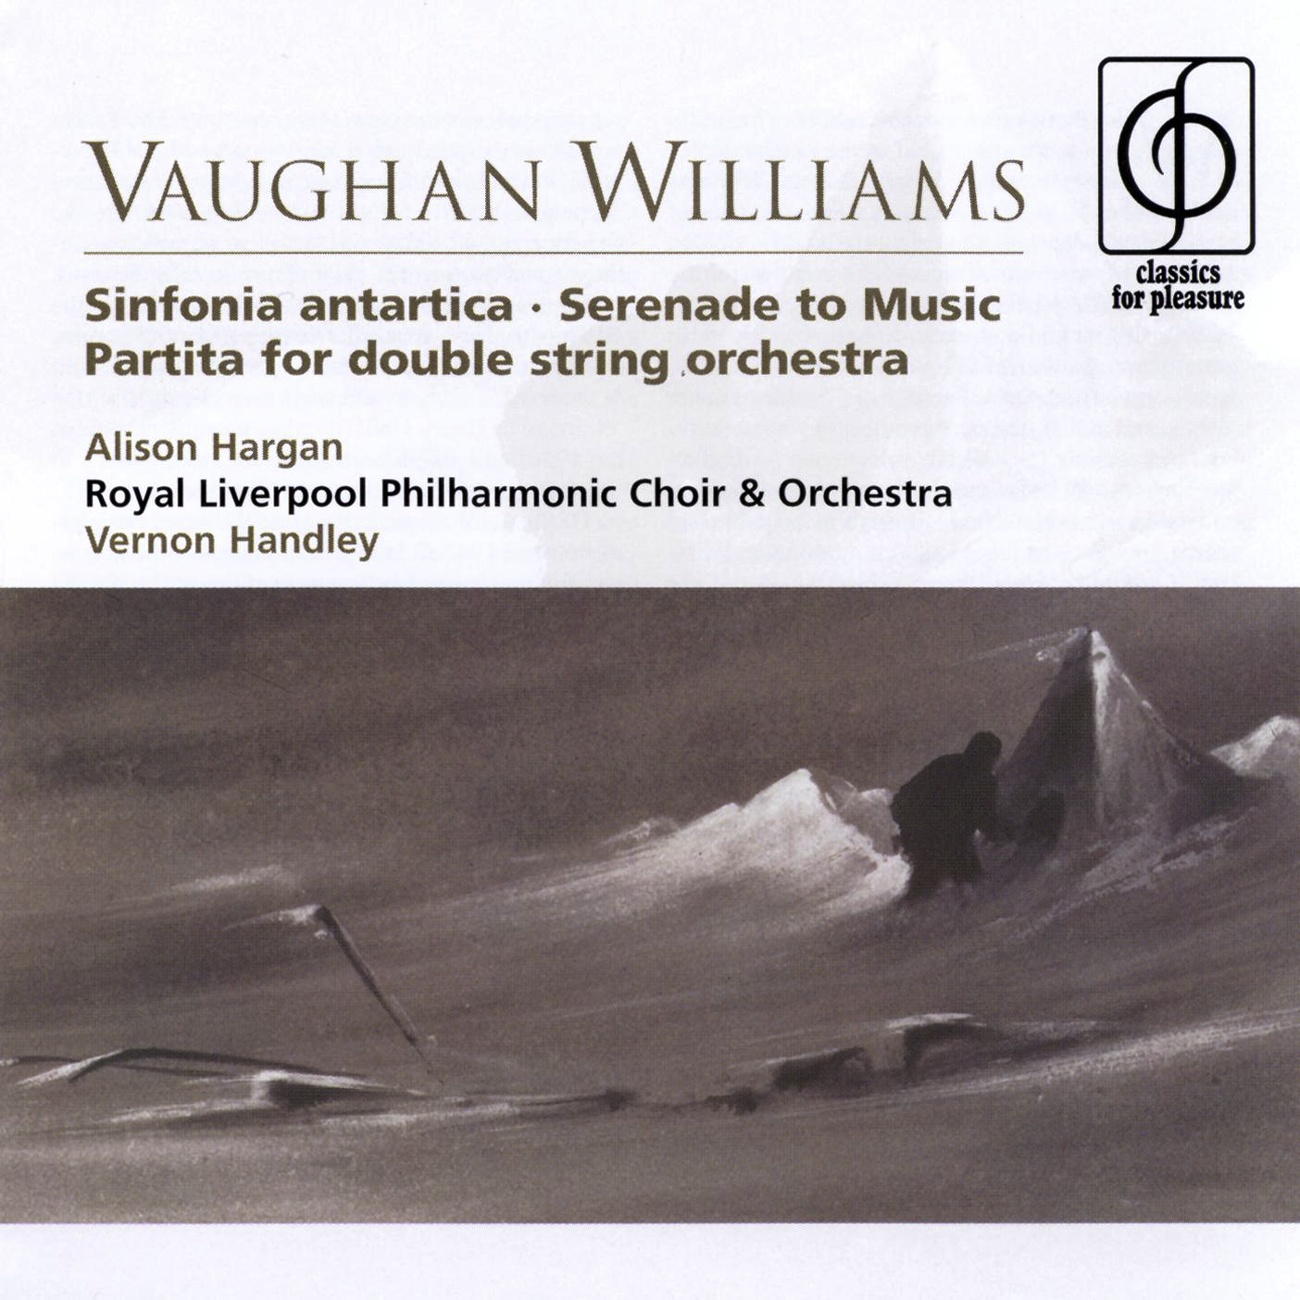 Vaughan Williams Sinfonia antartica, Serenade to Music, Partita for double string orchestra